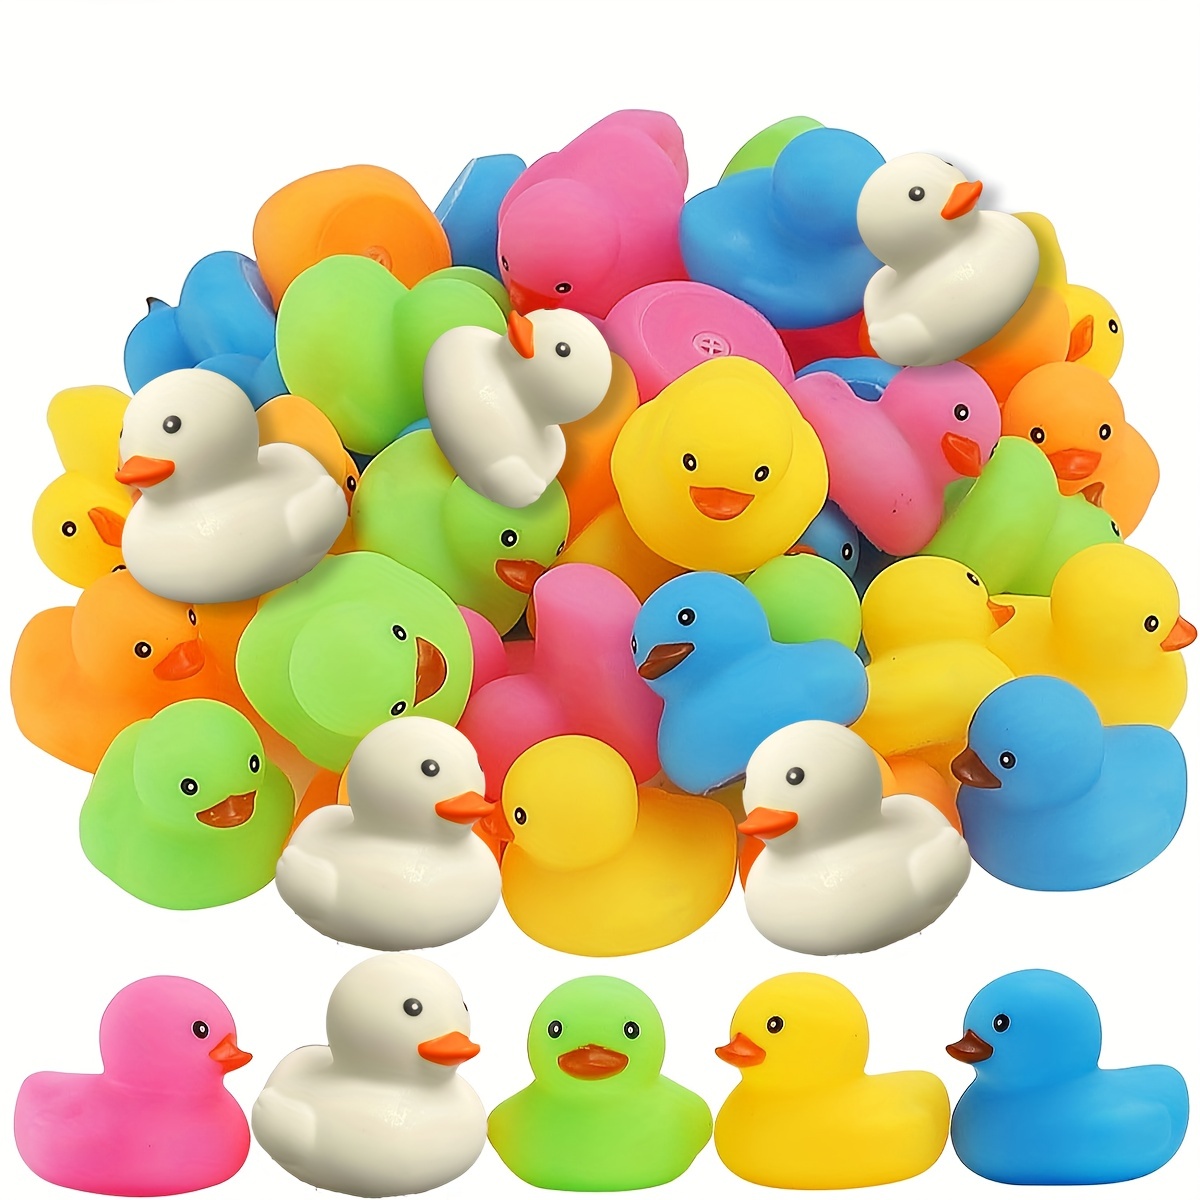 pink rubber duck baby shower